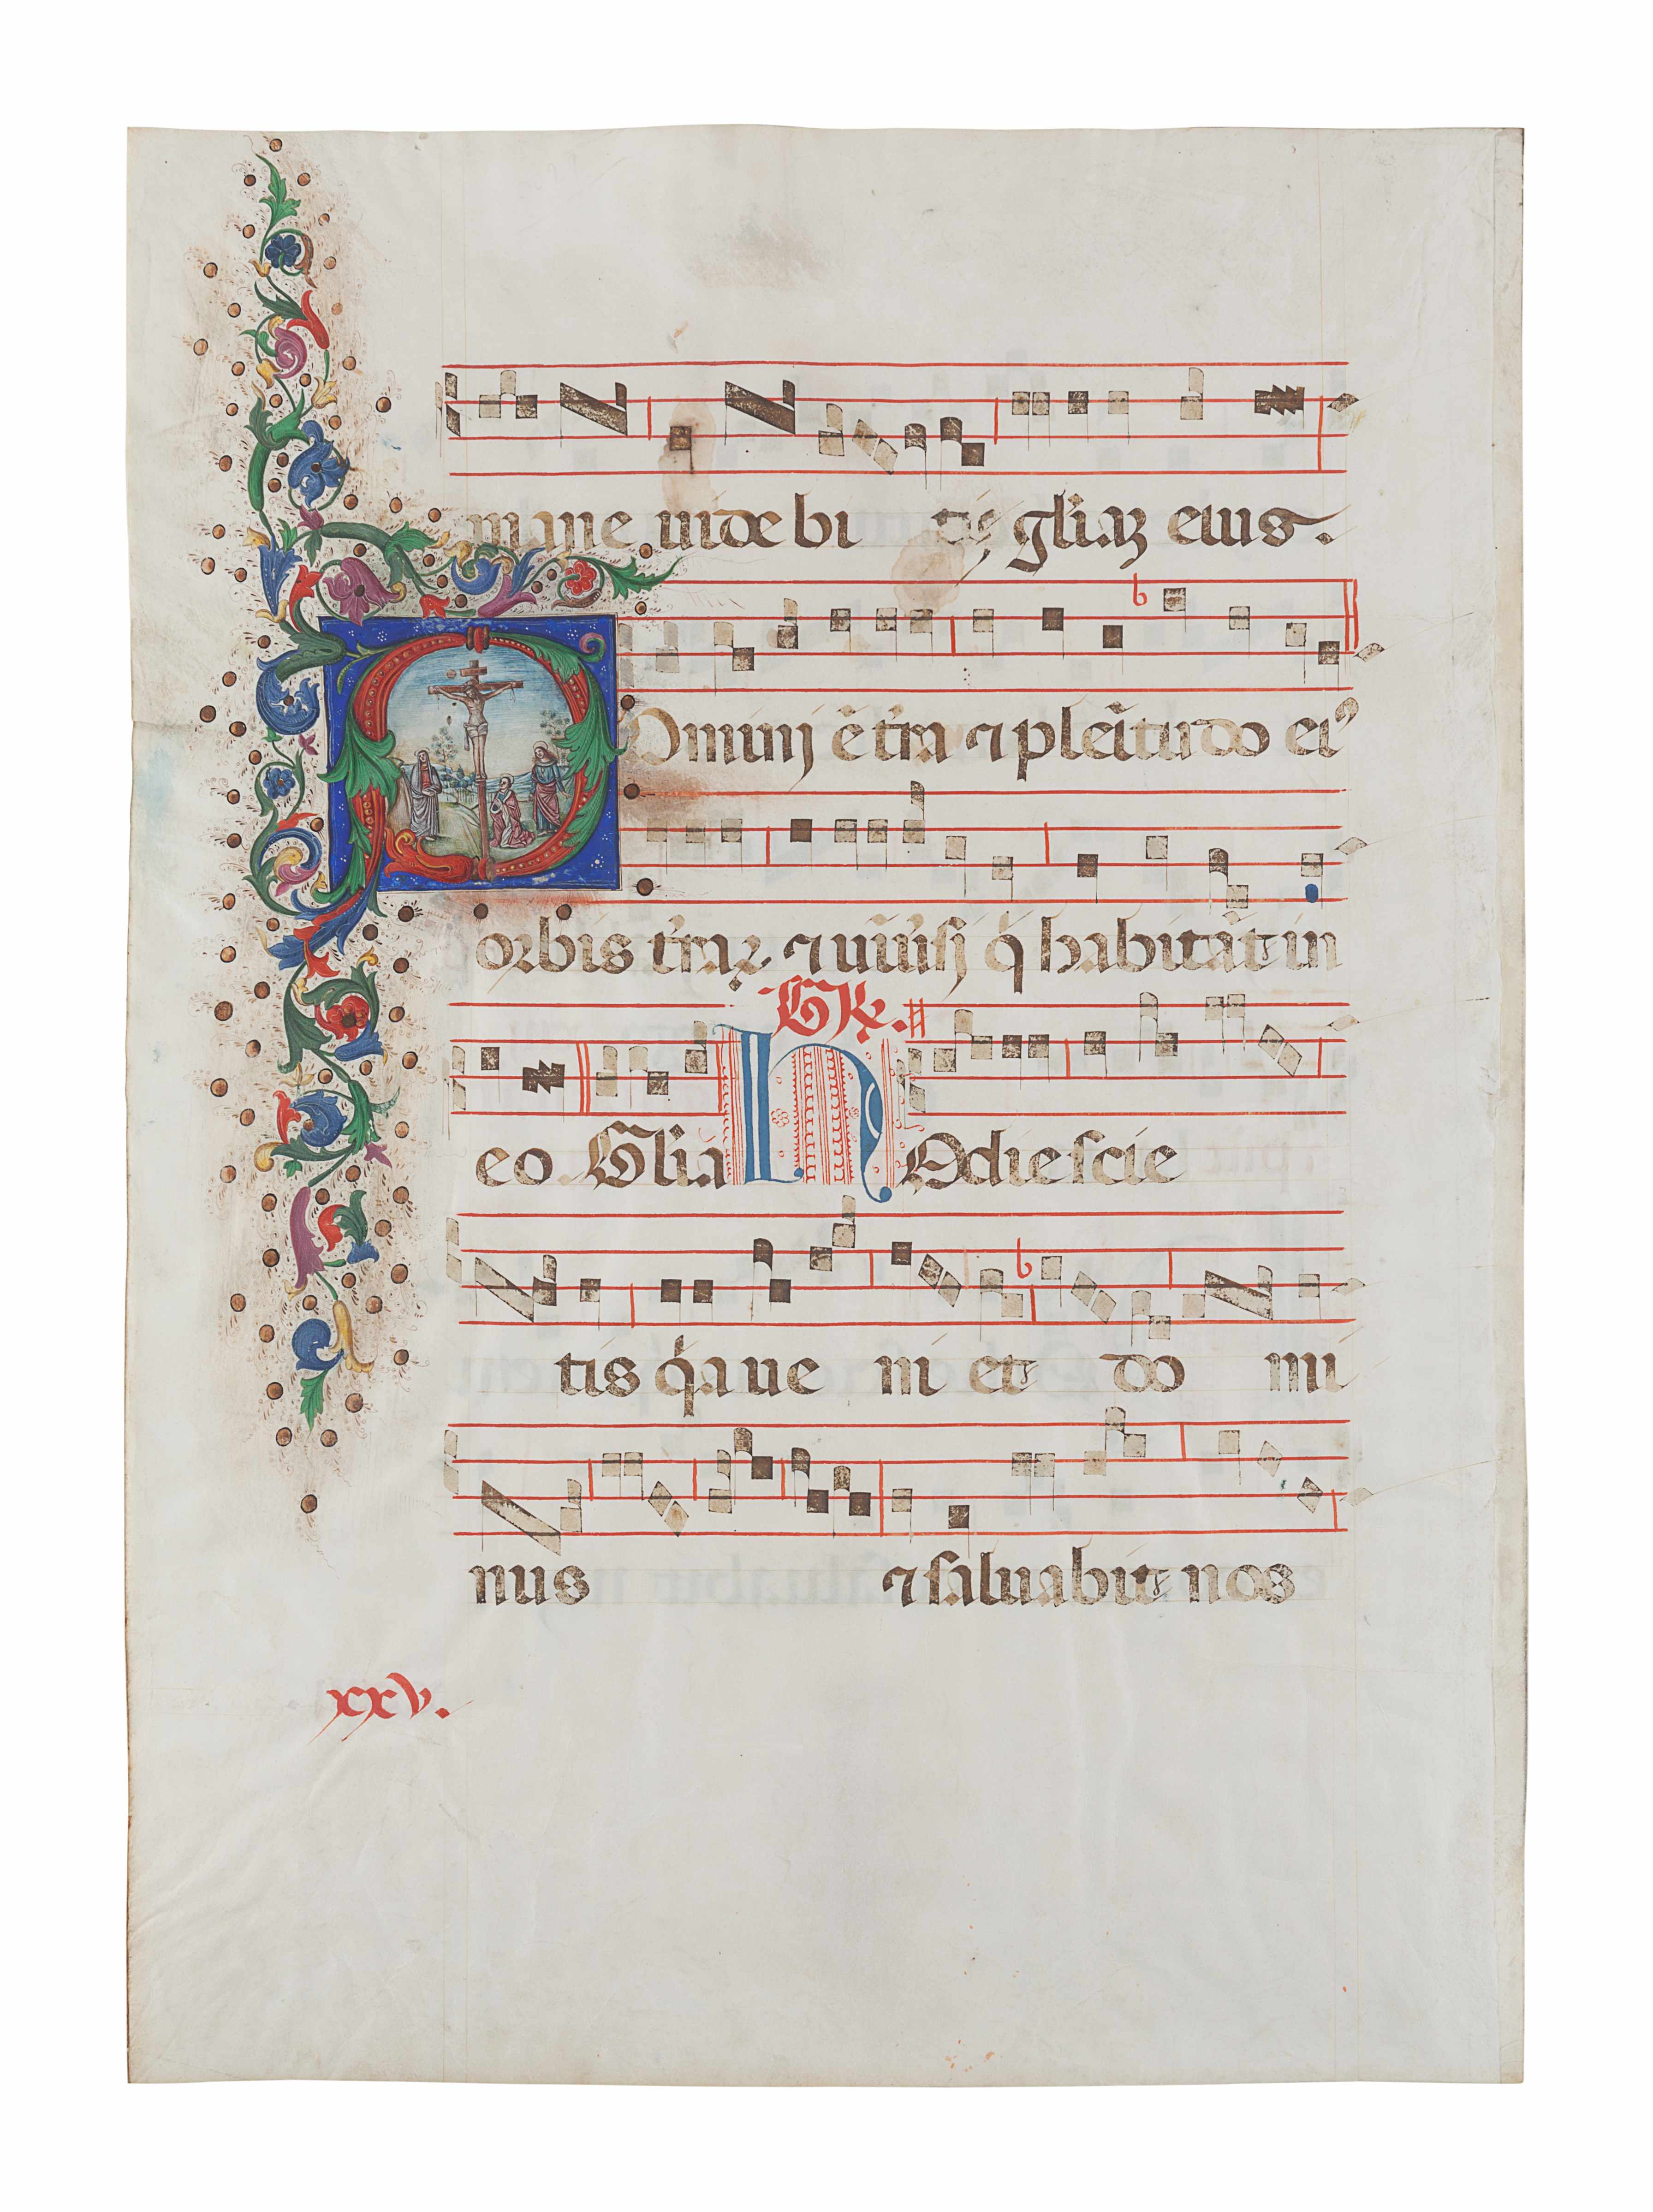 [ILLUMINATED MANUSCRIPTS]. Antiphonal leaf with large historiated initial "D" on verso depicting th